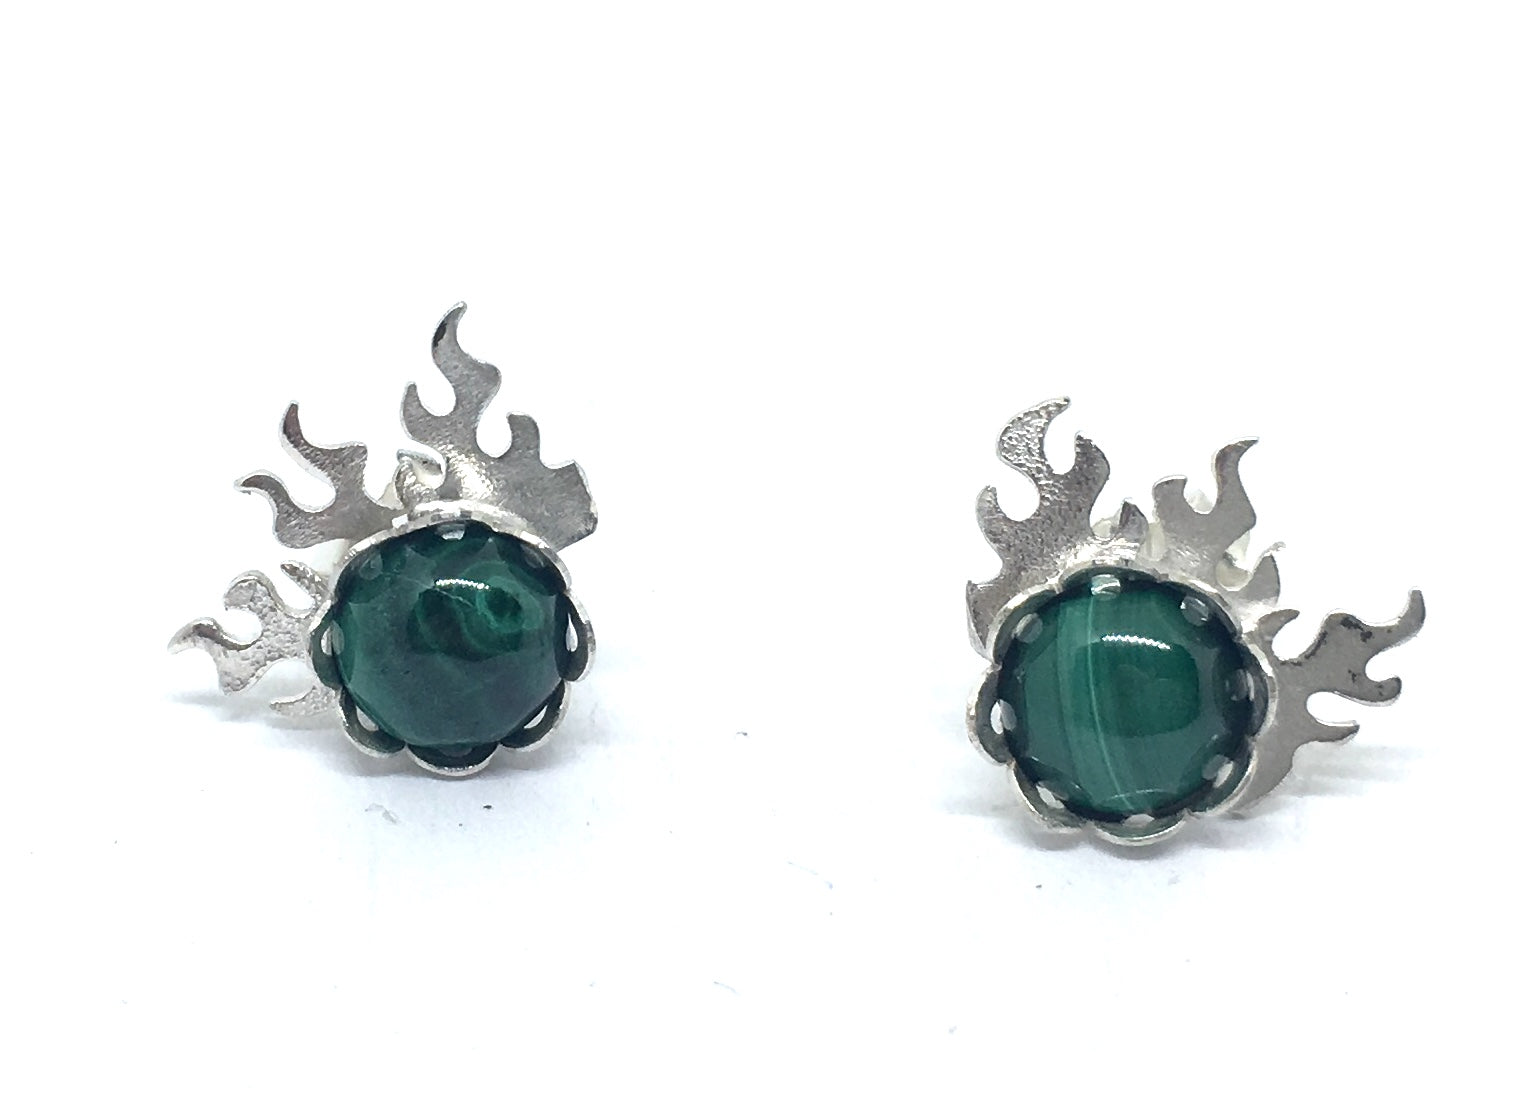 Malachite gems are in bezel settings, accented by flames